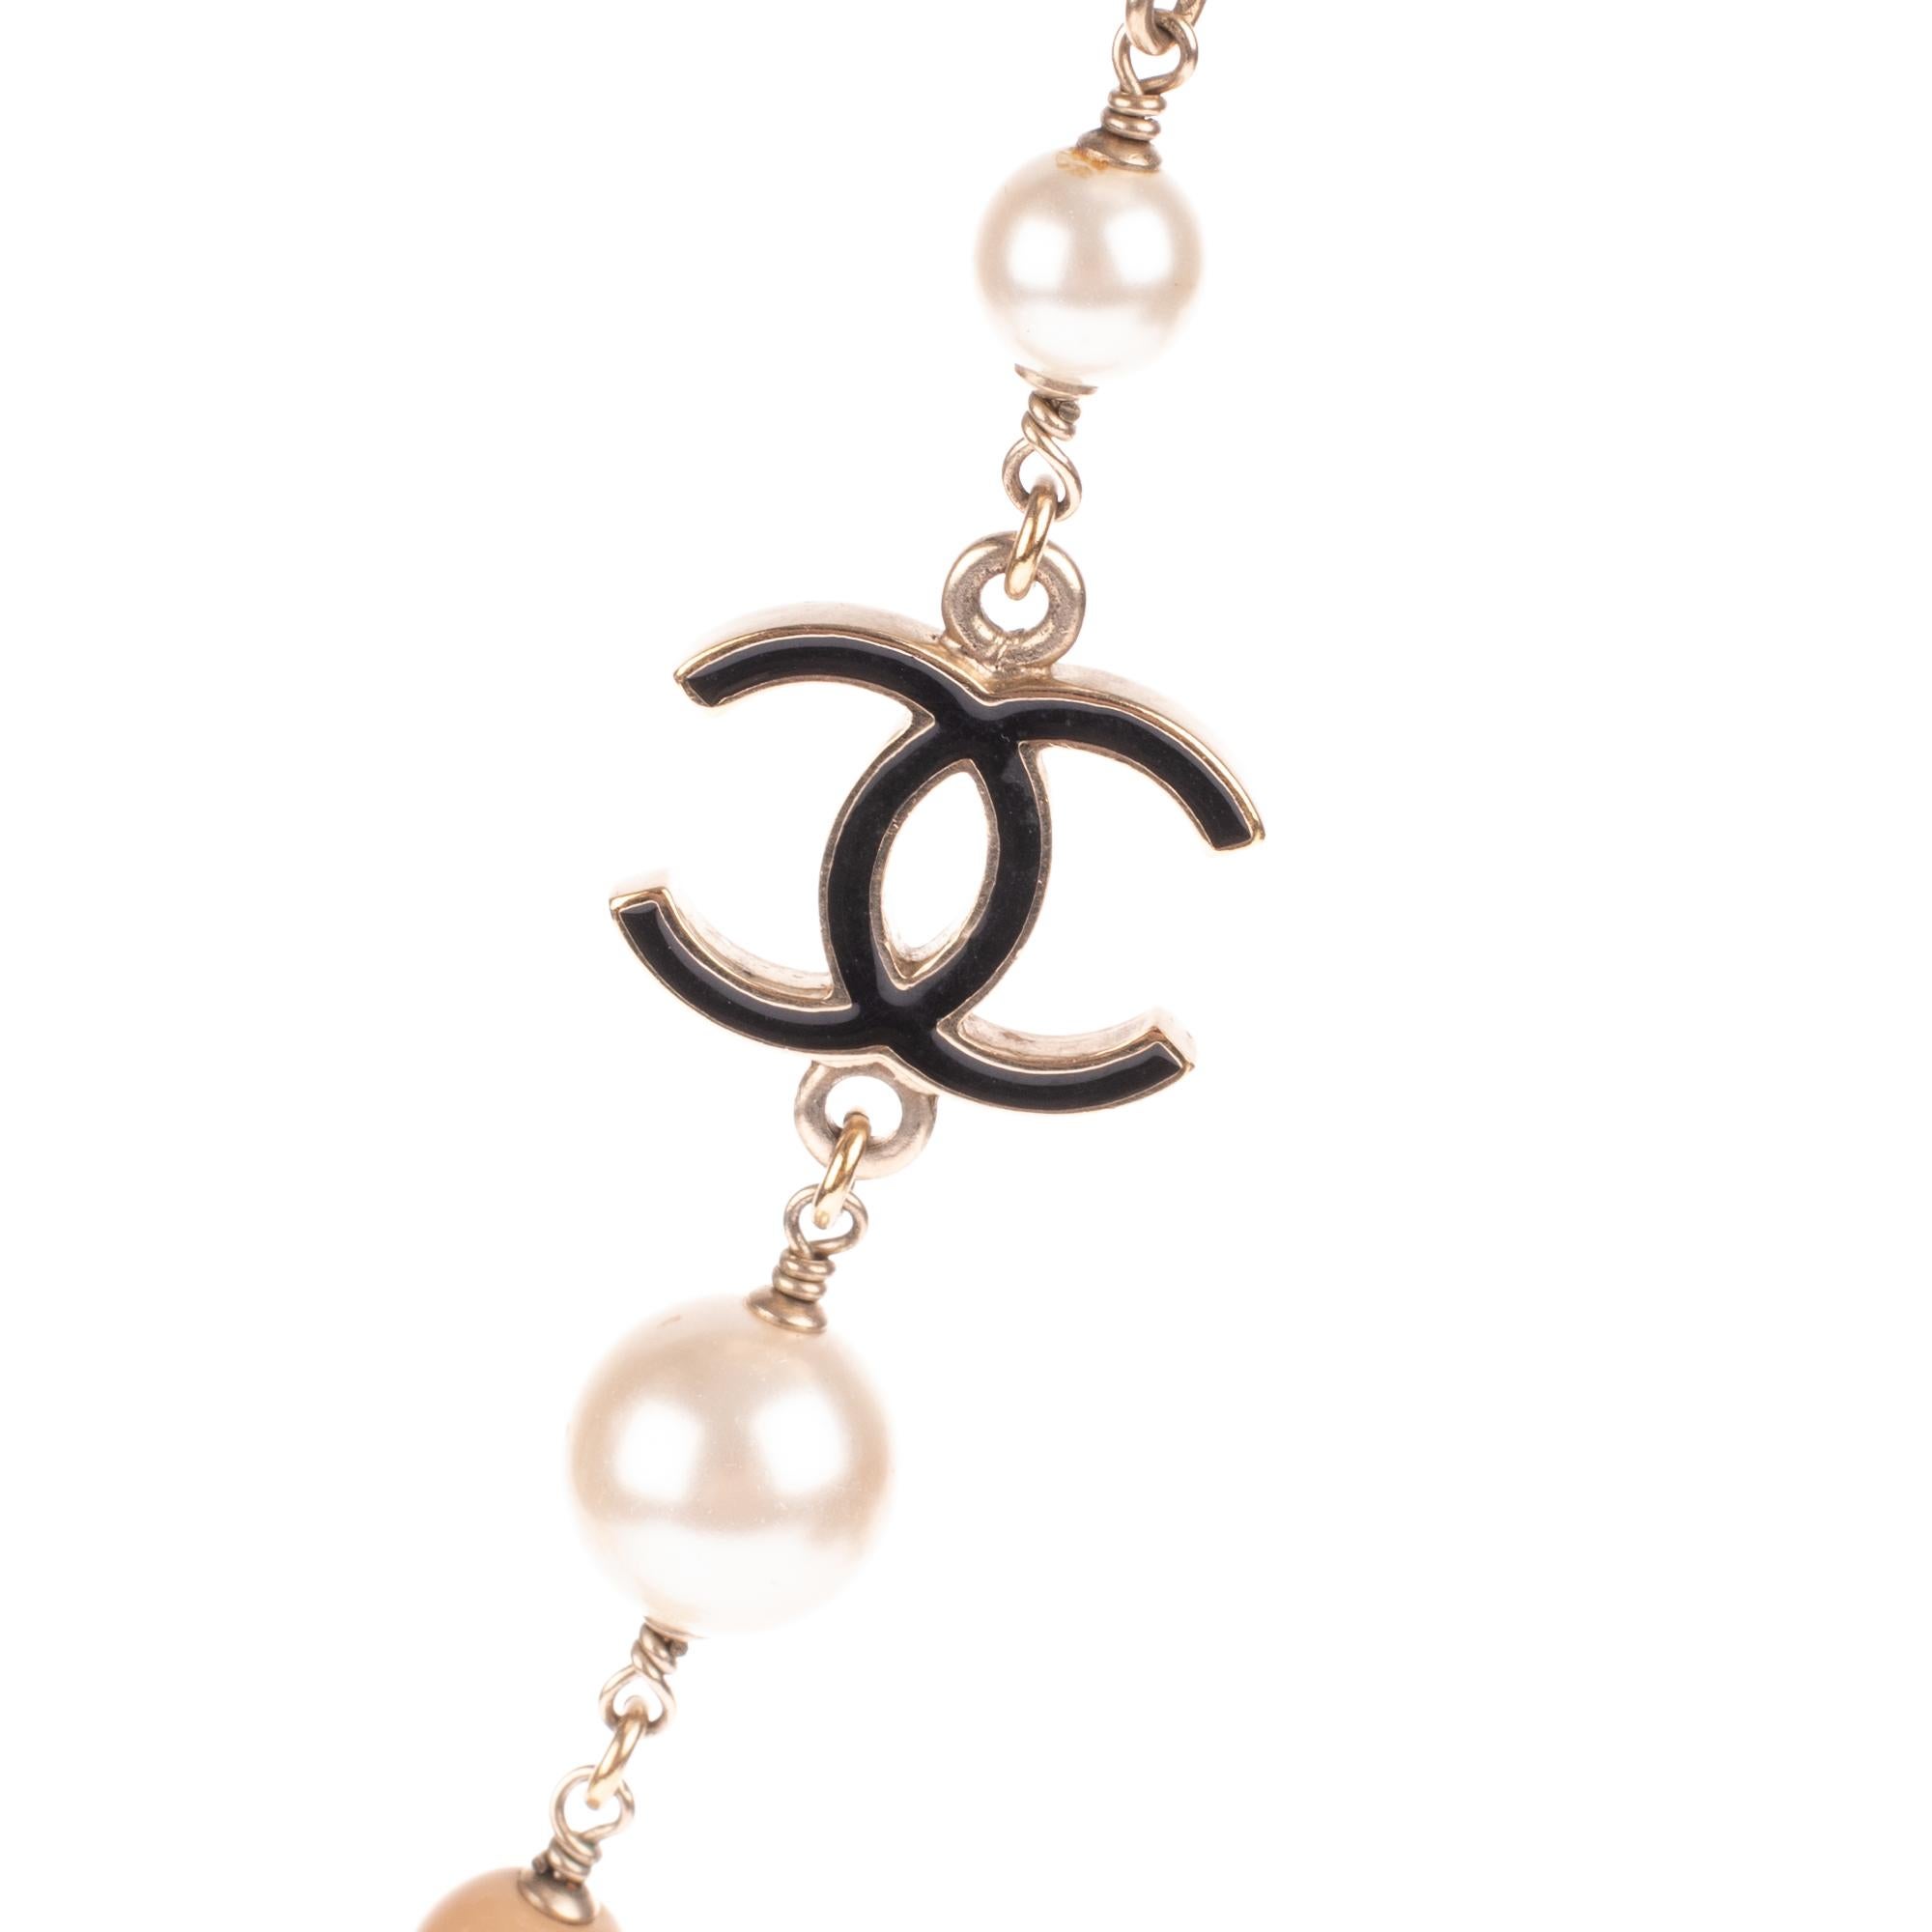 chanel 100th anniversary necklace